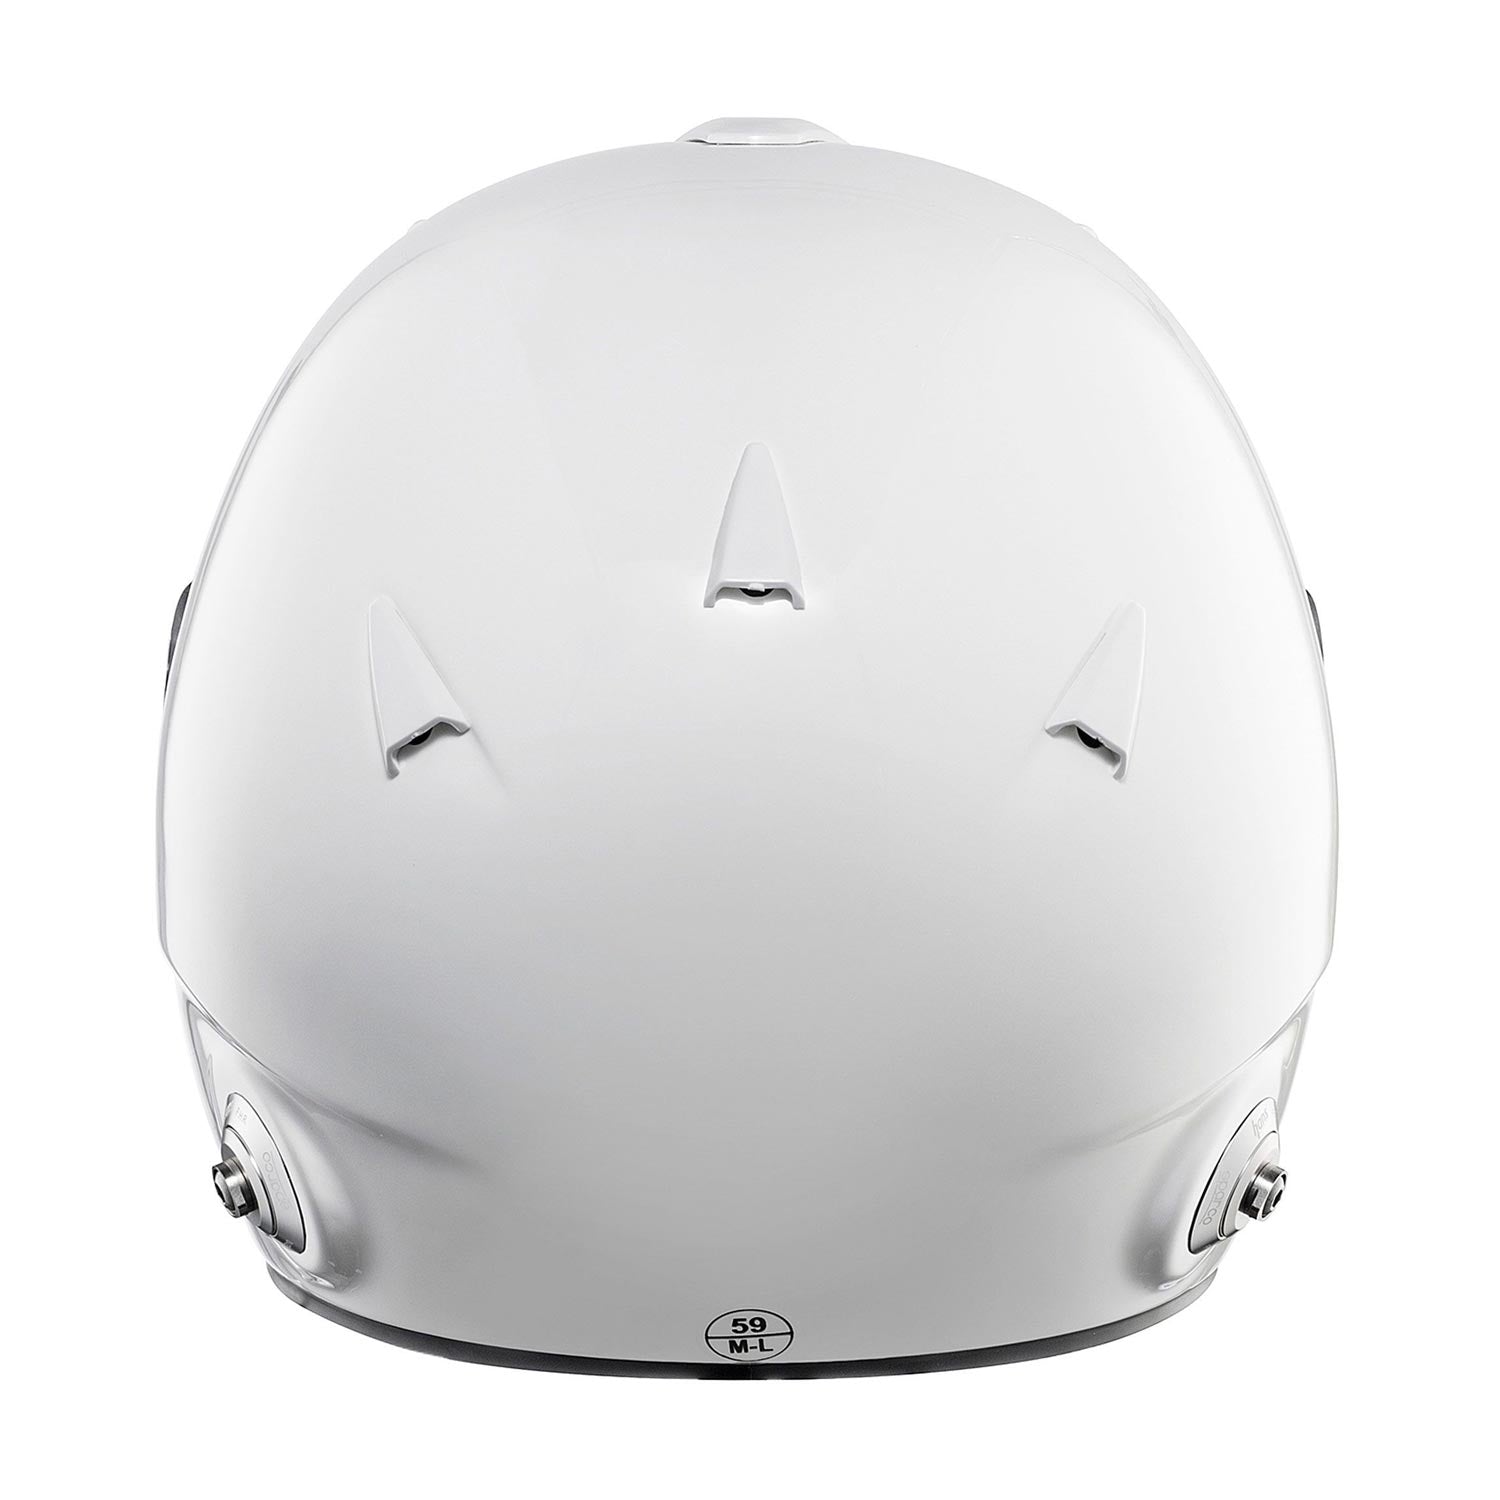 SPARCO 003375BIRS1S RF-5W Racing helmet, FIA/SNELL SA2020, white/red, size S (55-56) Photo-1 